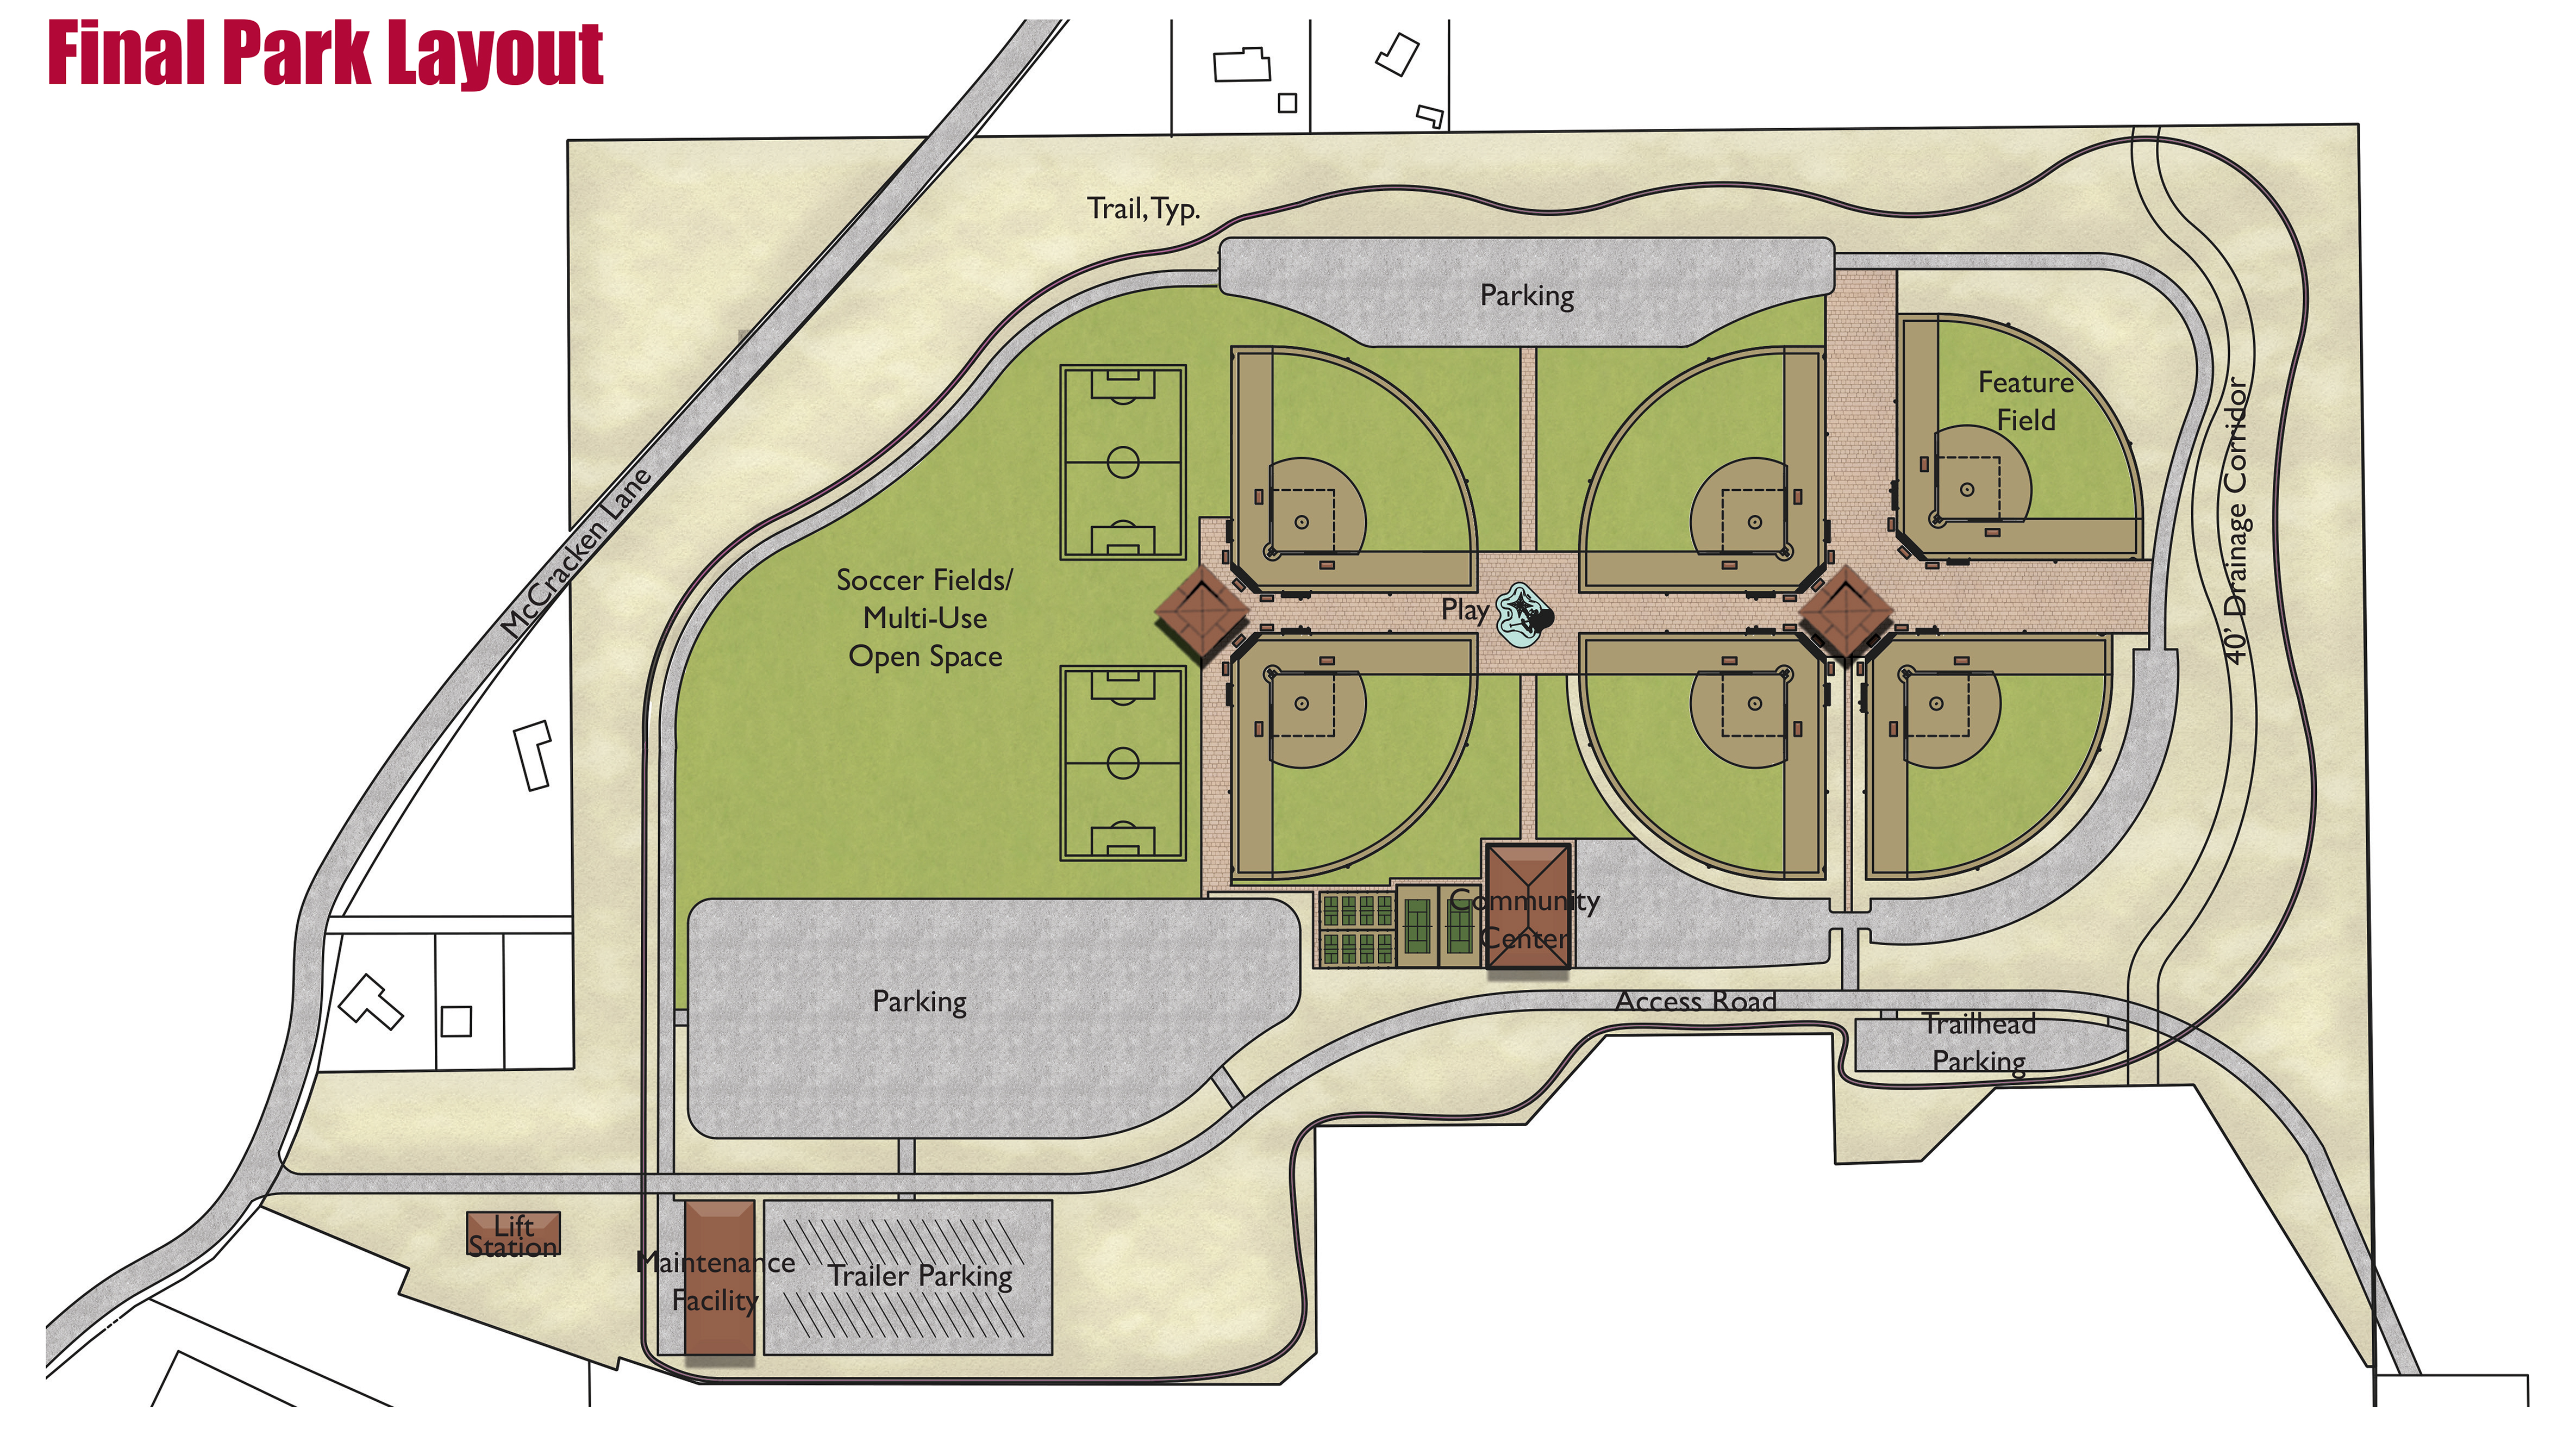 Park final. Layout of facility. Camp Verde. Field Layout. Shop and parking Layout.